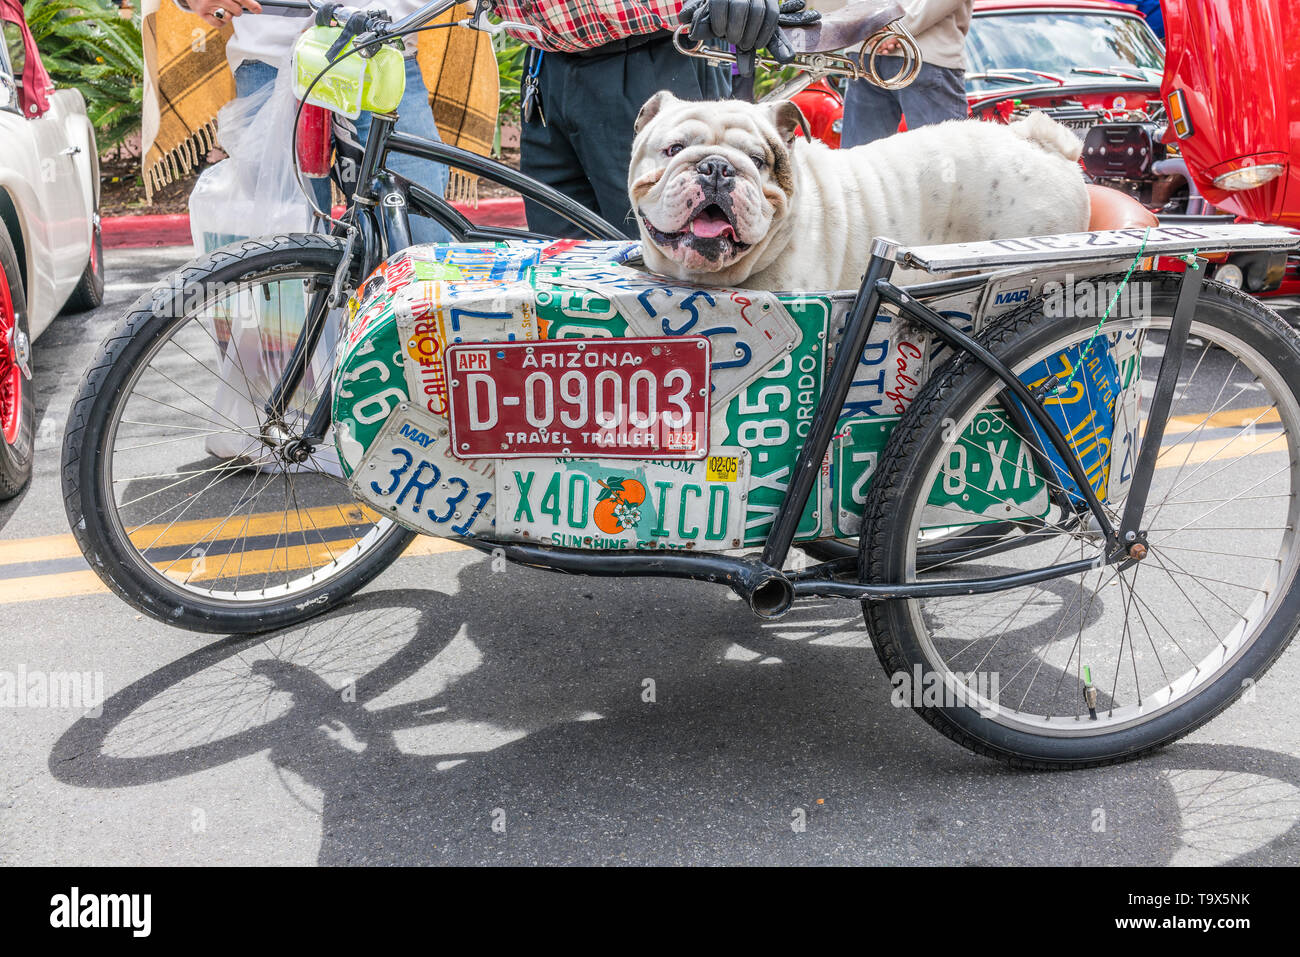 A British/English bulldog in a bicycle sidecar that has the side of the sidecar covered with license plates from a number of USA states at the State S Stock Photo